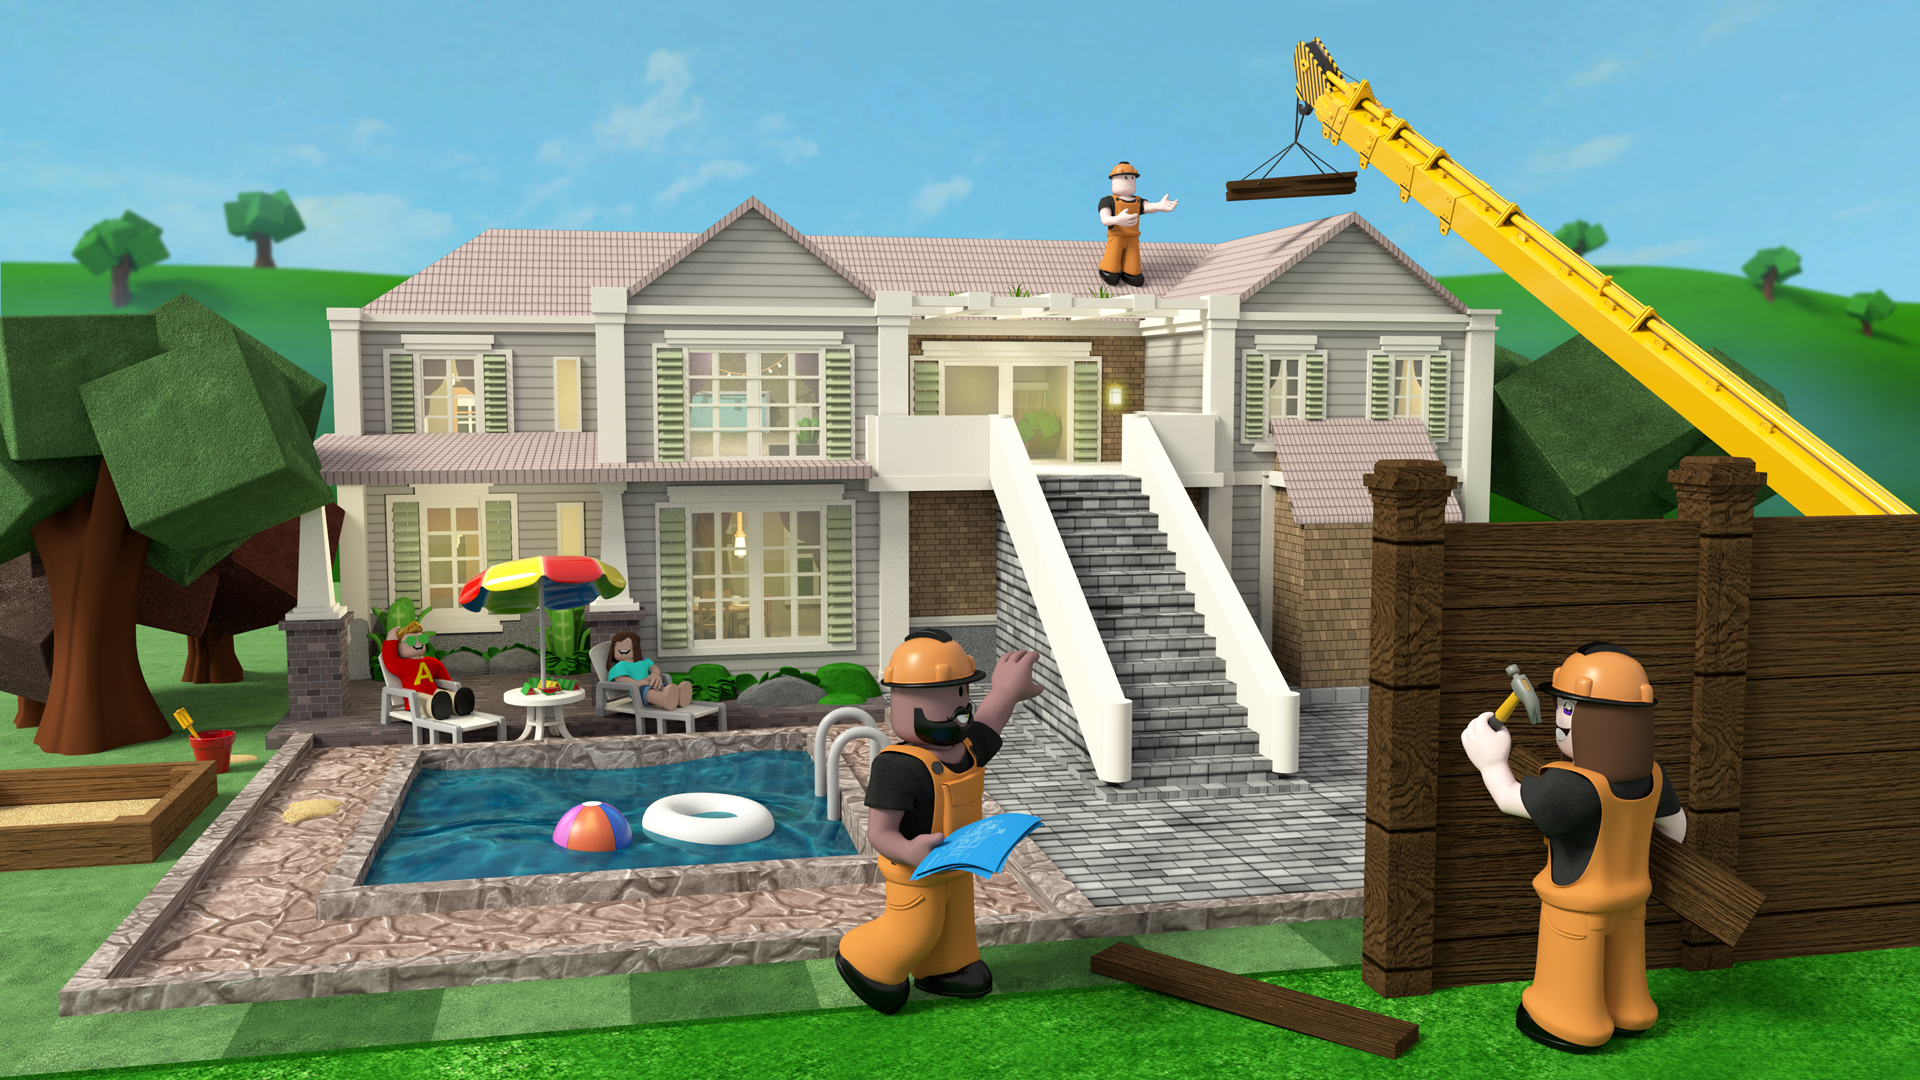 An Inside Look At Roblox The Gaming Universe That S Exploded To 164 000 000 Users By Spero Ventures Spero Ventures Sep 2020 Medium - inside roblox our vision and technology youtube